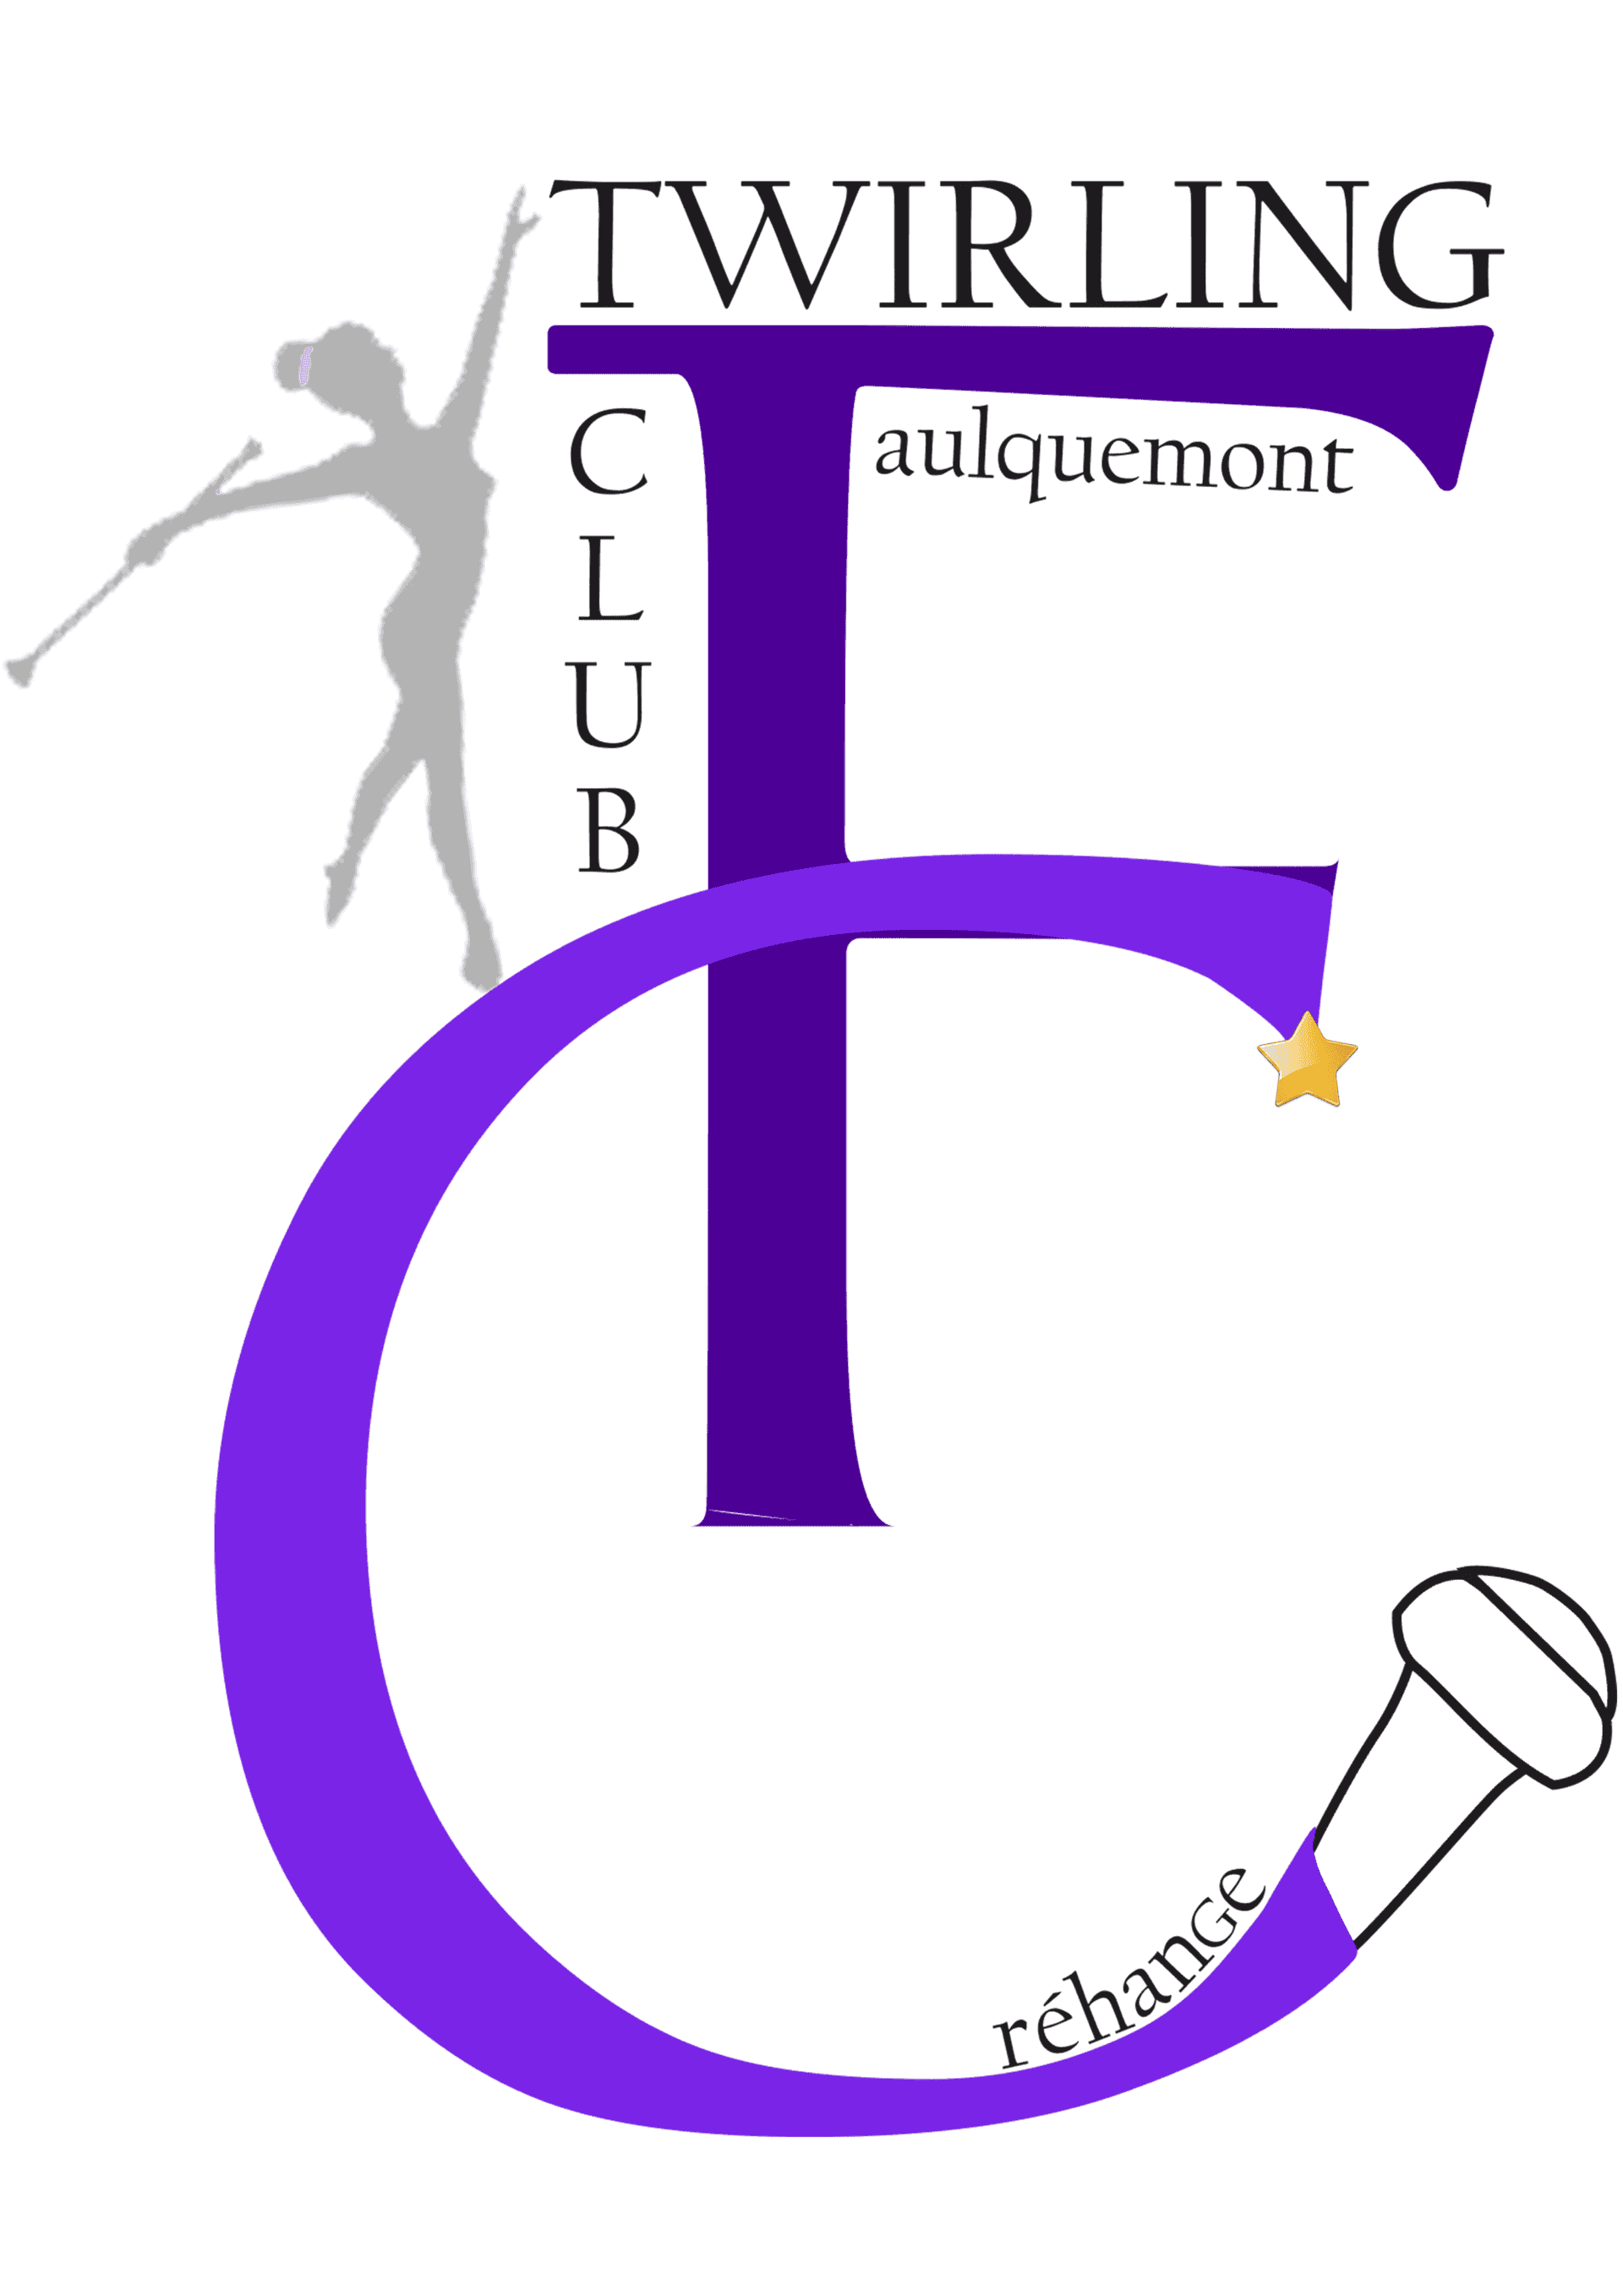 twirling club faulquemont.png